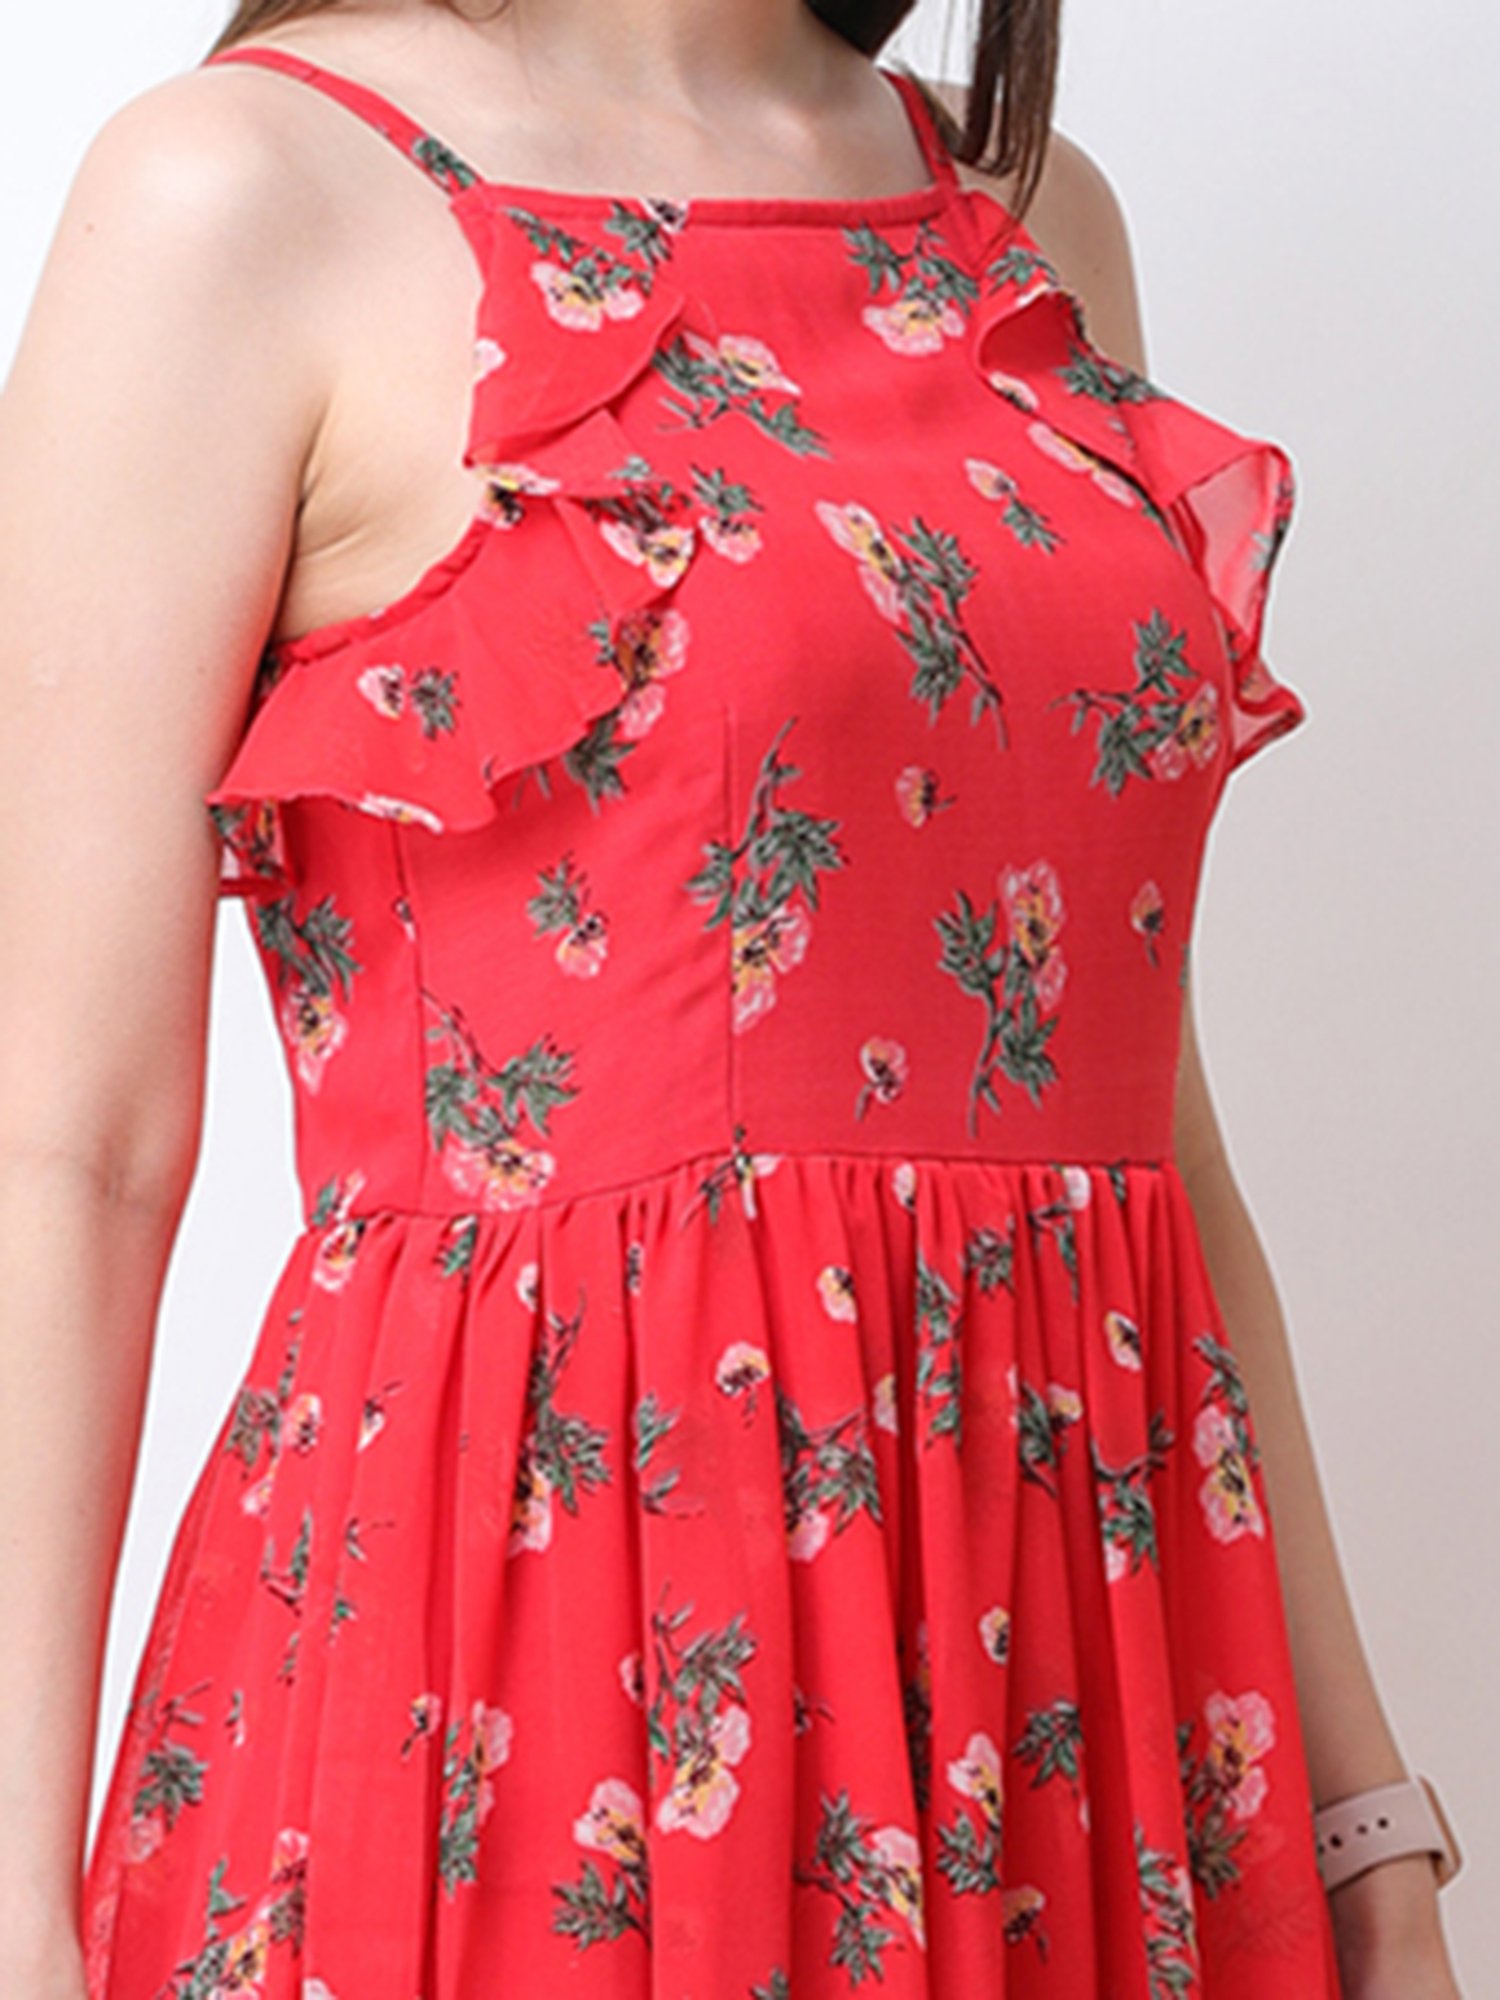 Petite Studio's Carly Dress in Red Floral - Women's Fashion